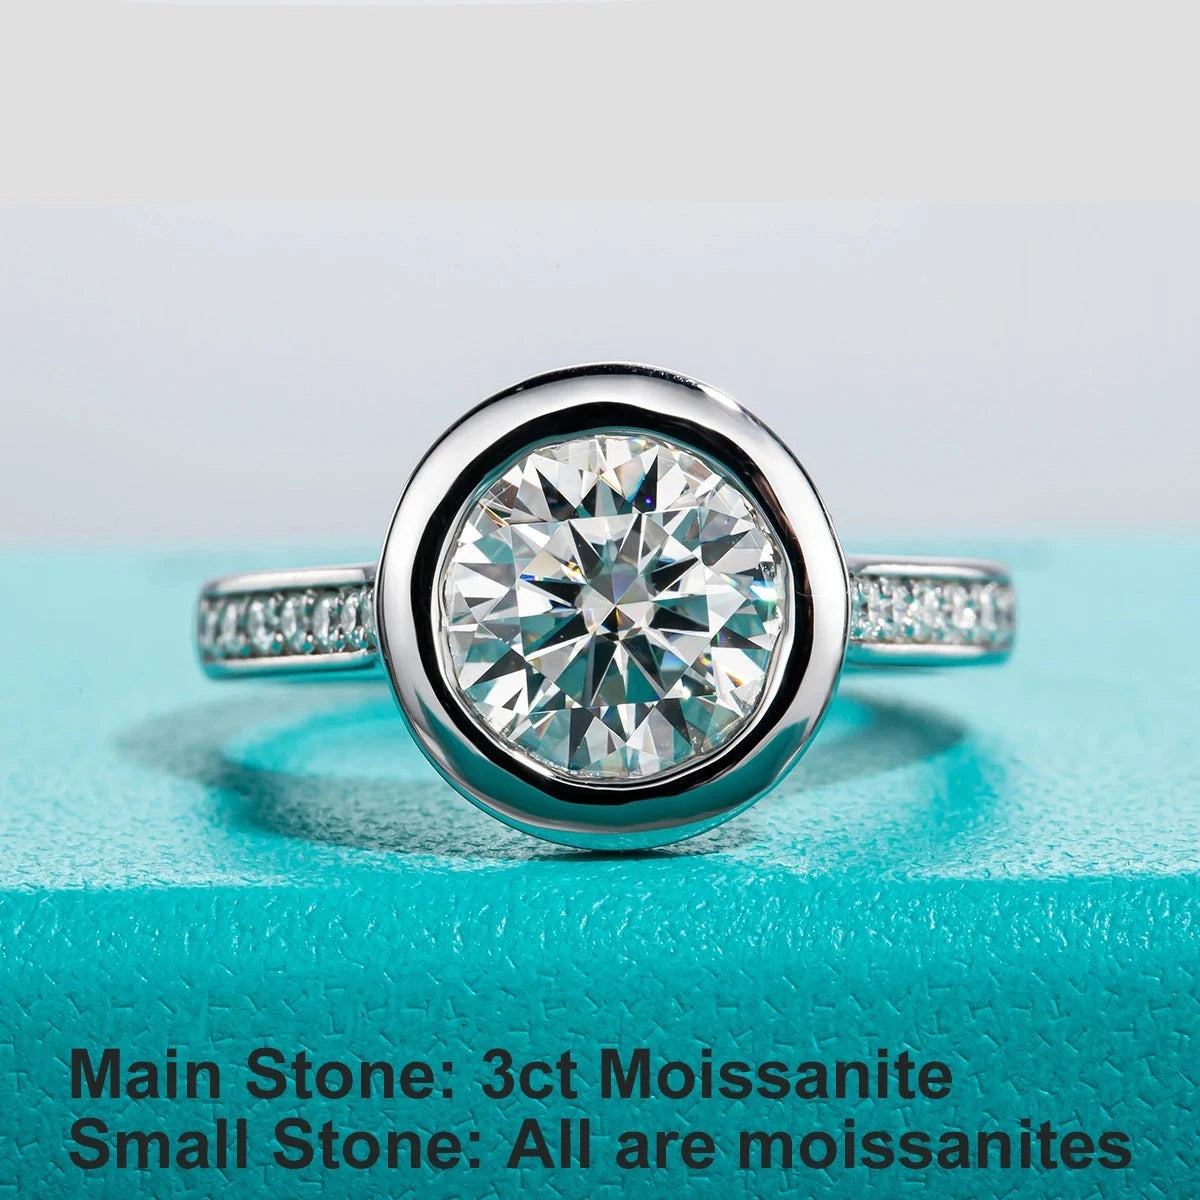 Shop For Moissanite Engagement Rings. 3.0 Carat. Fine Jewelry.